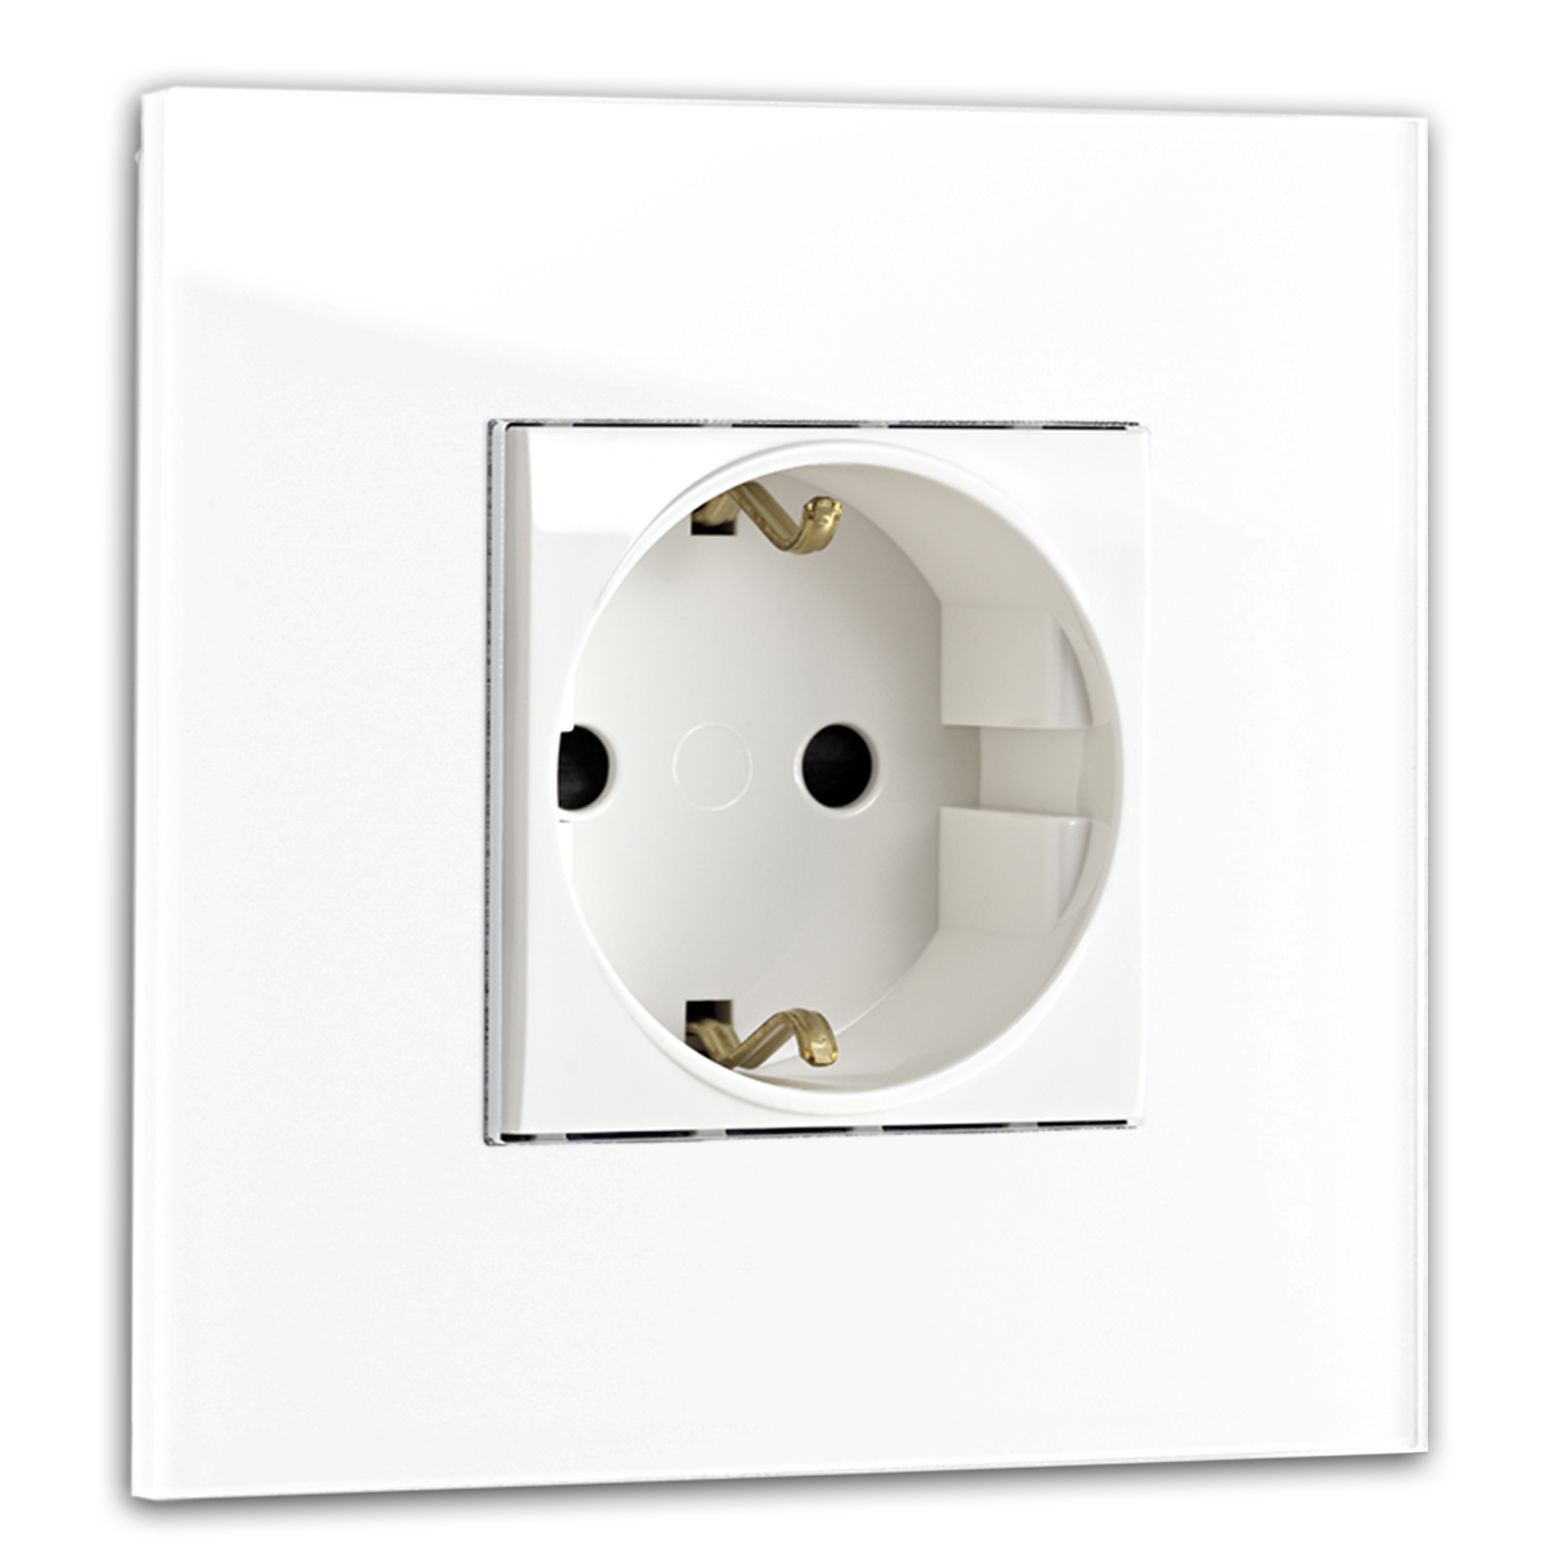 Design socket outlet in glass look. MAXIM